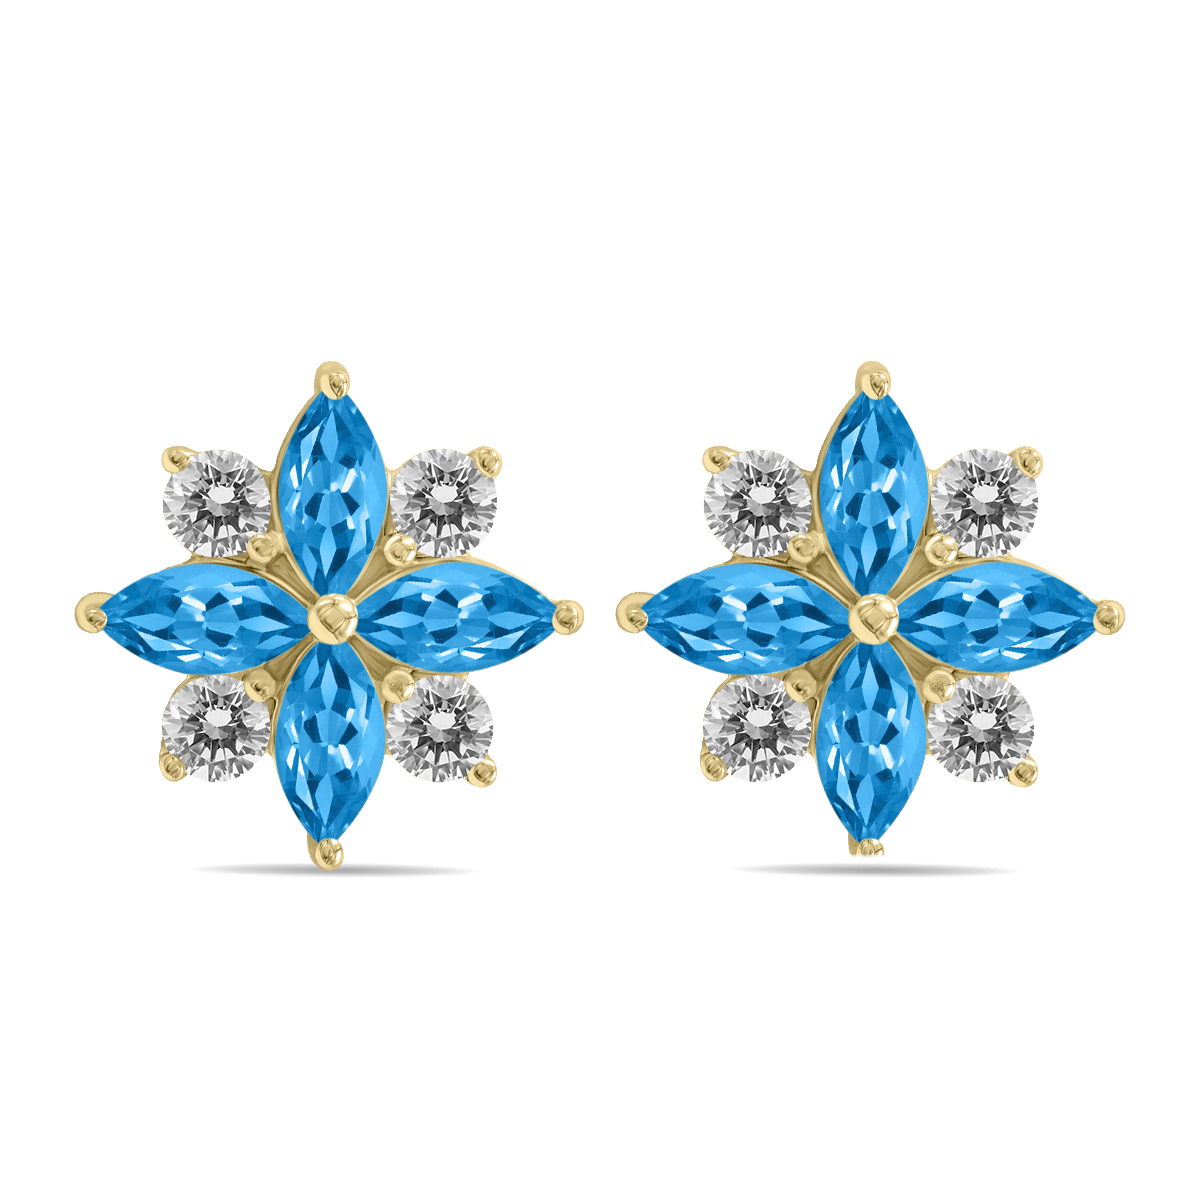 Image of 1 Carat TW Blue Topaz and Diamond Flower Earrings in 10K Yellow Gold